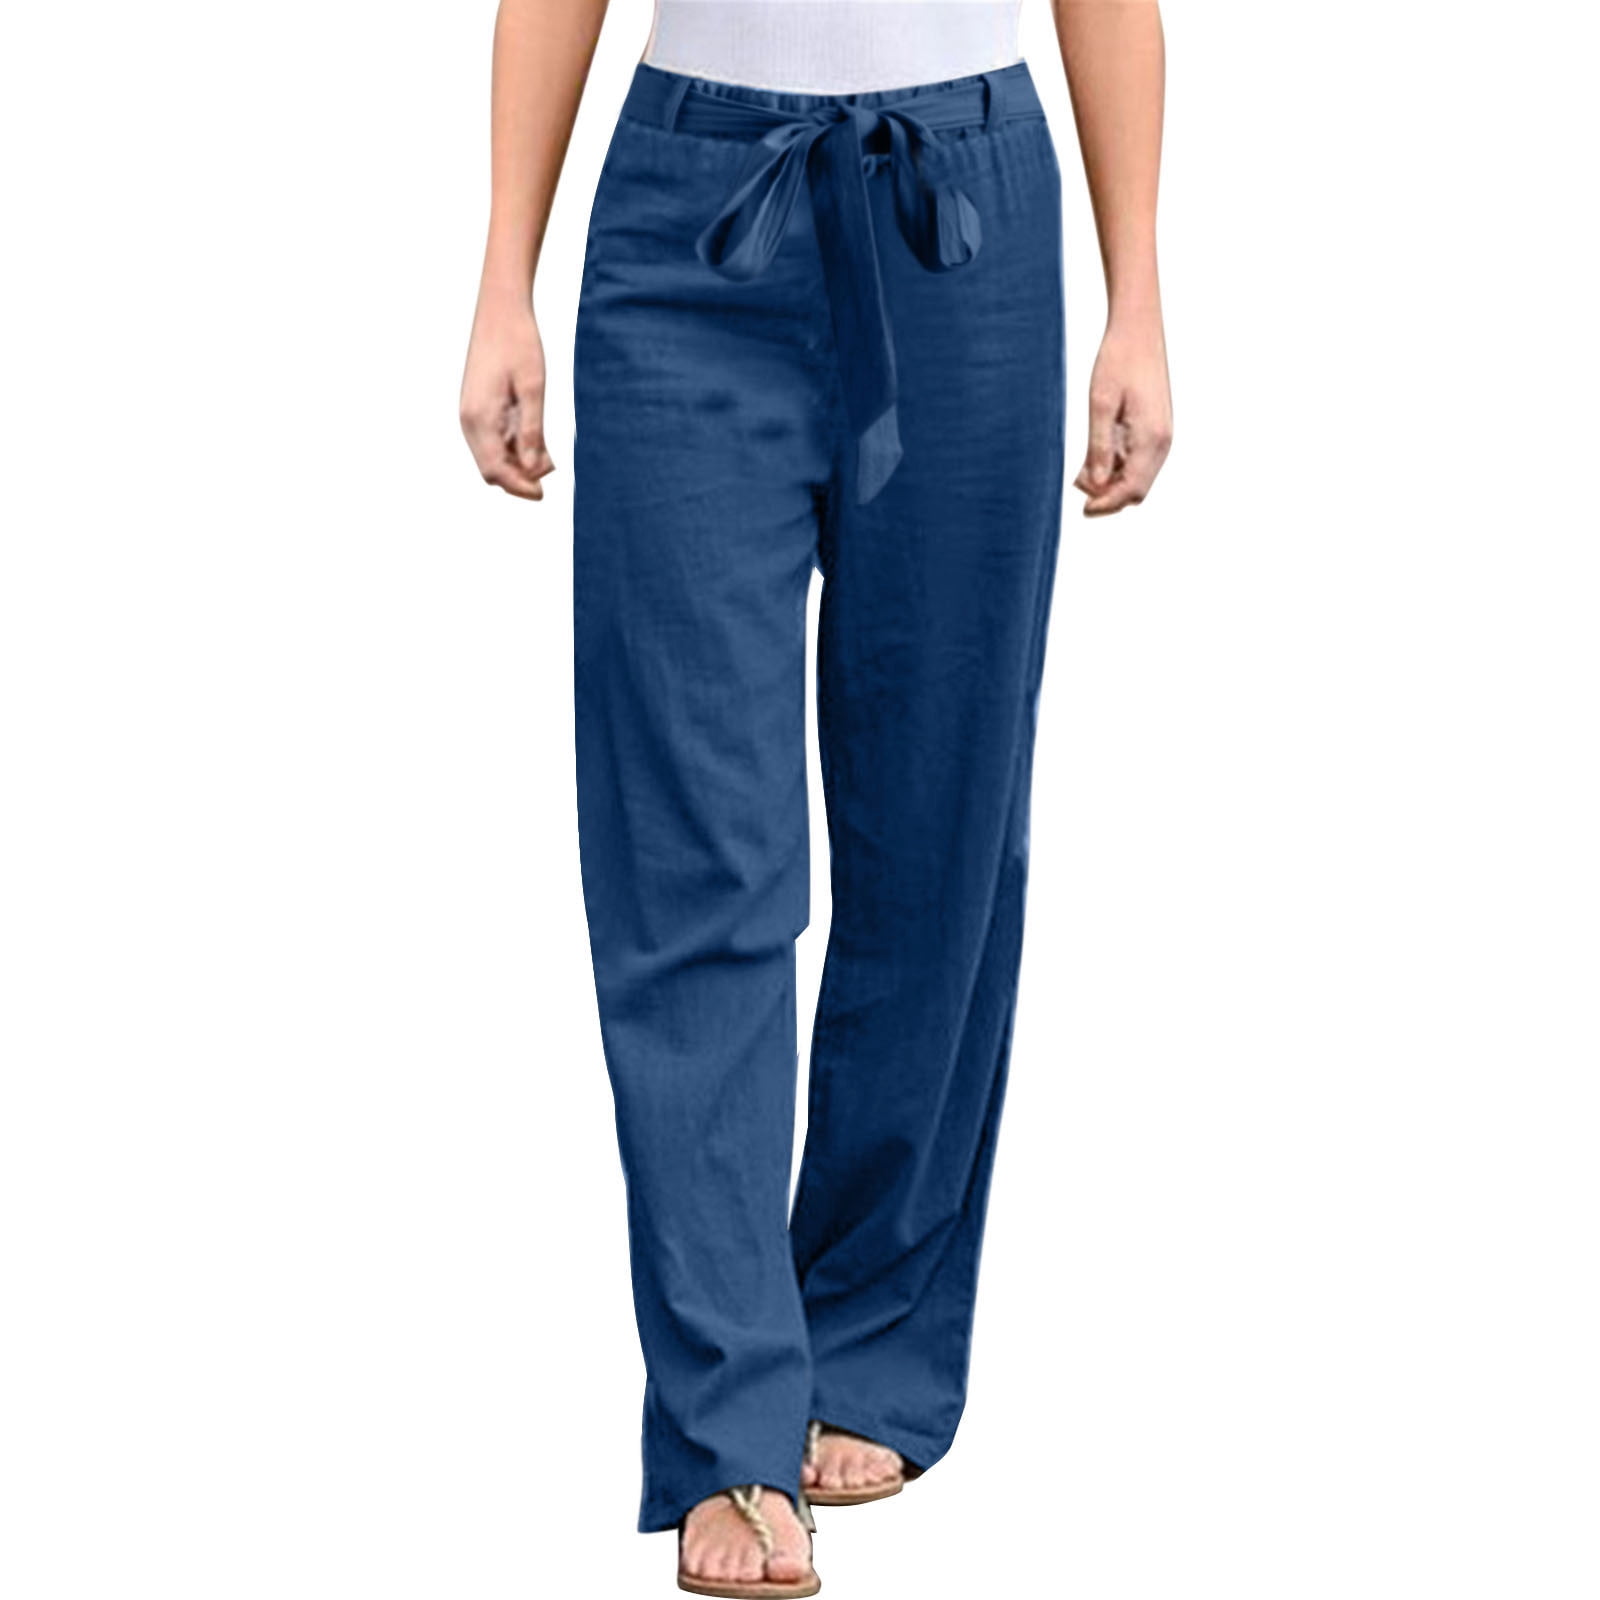 adviicd Business Casual Pants For Women Women Pull-on Distressed